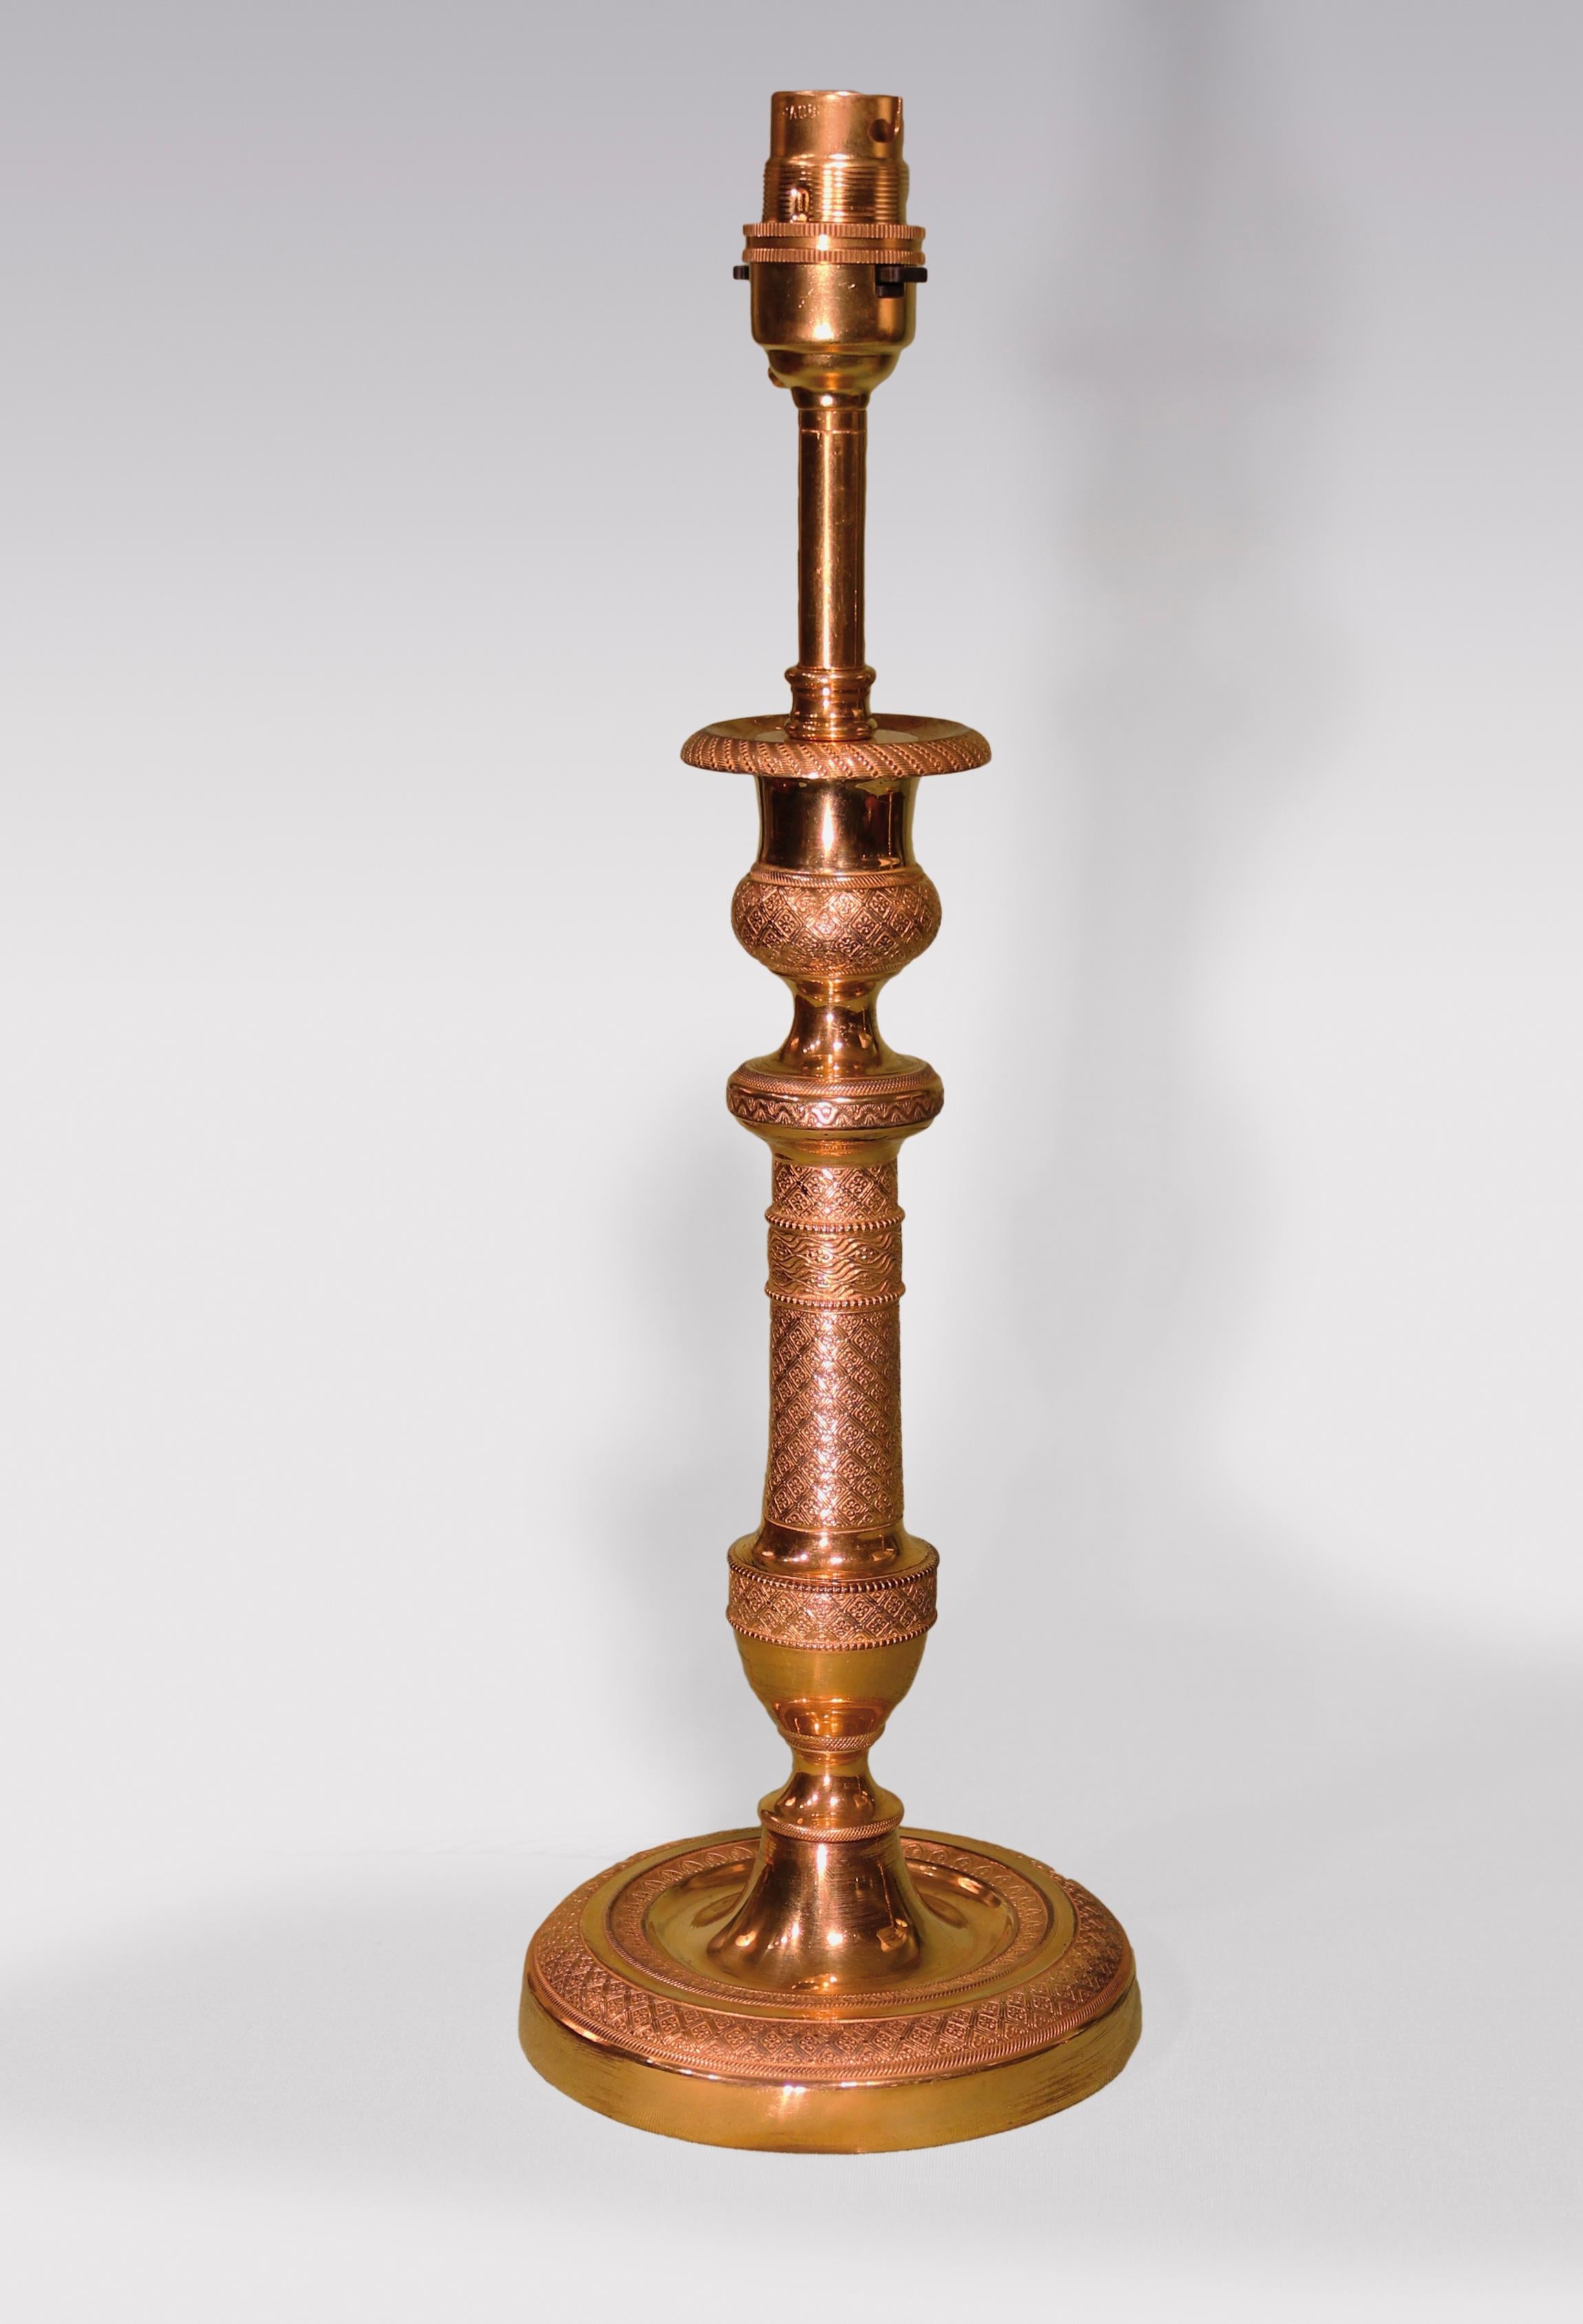 A pair of early 19th century ormolu candlesticks intricately engine turned throughout, having vase-shaped nozzles above tapering stems with urns below supported on circular bases. (Now converted to lamps.)